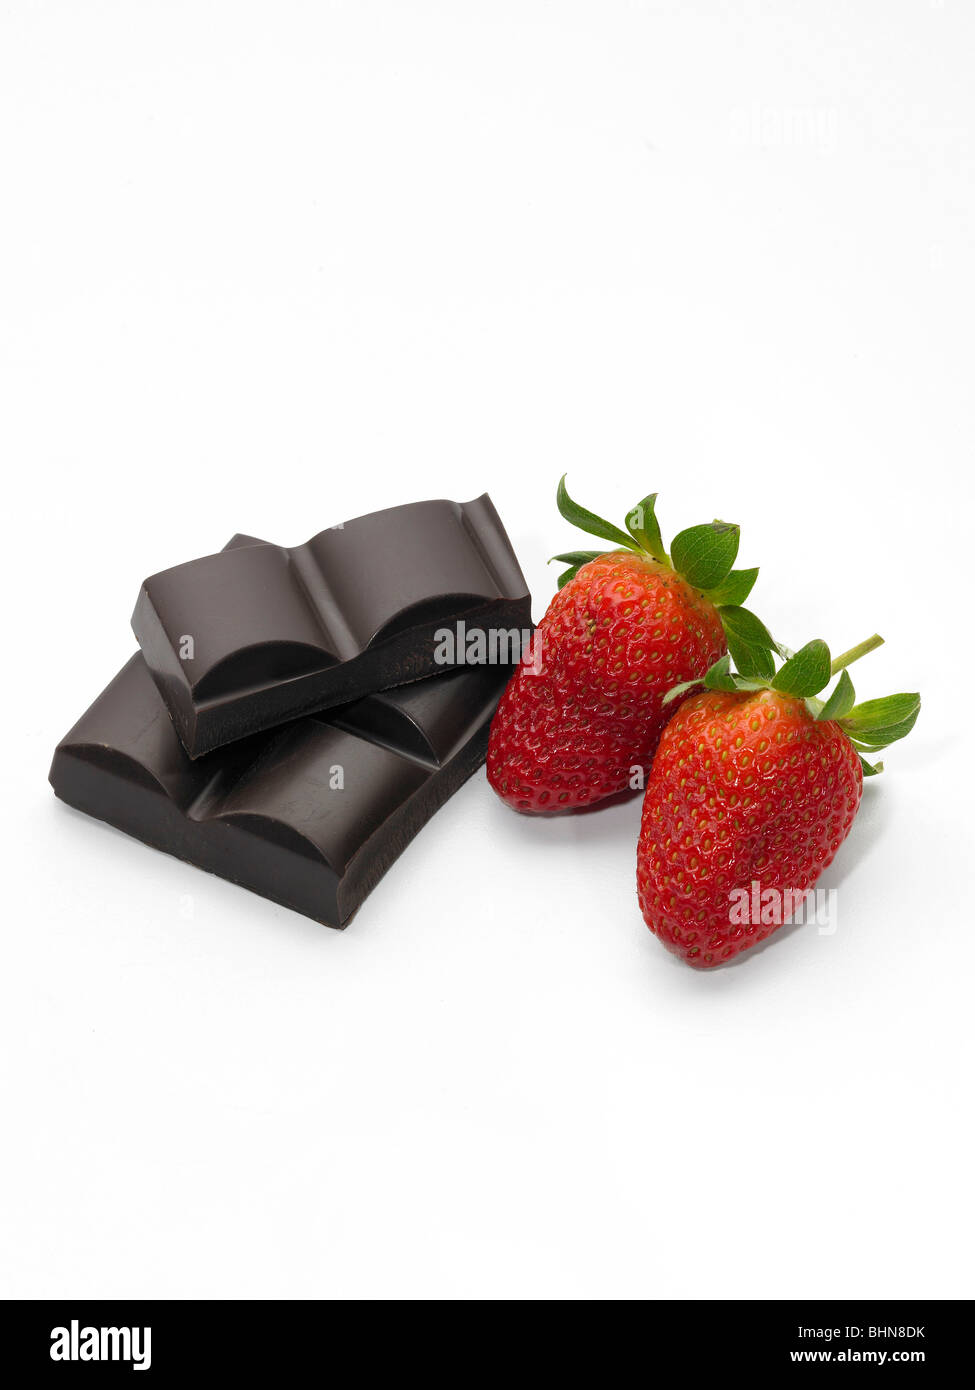 Plain Chocolate Chunks and Two Strawberries on White Background Stock Photo